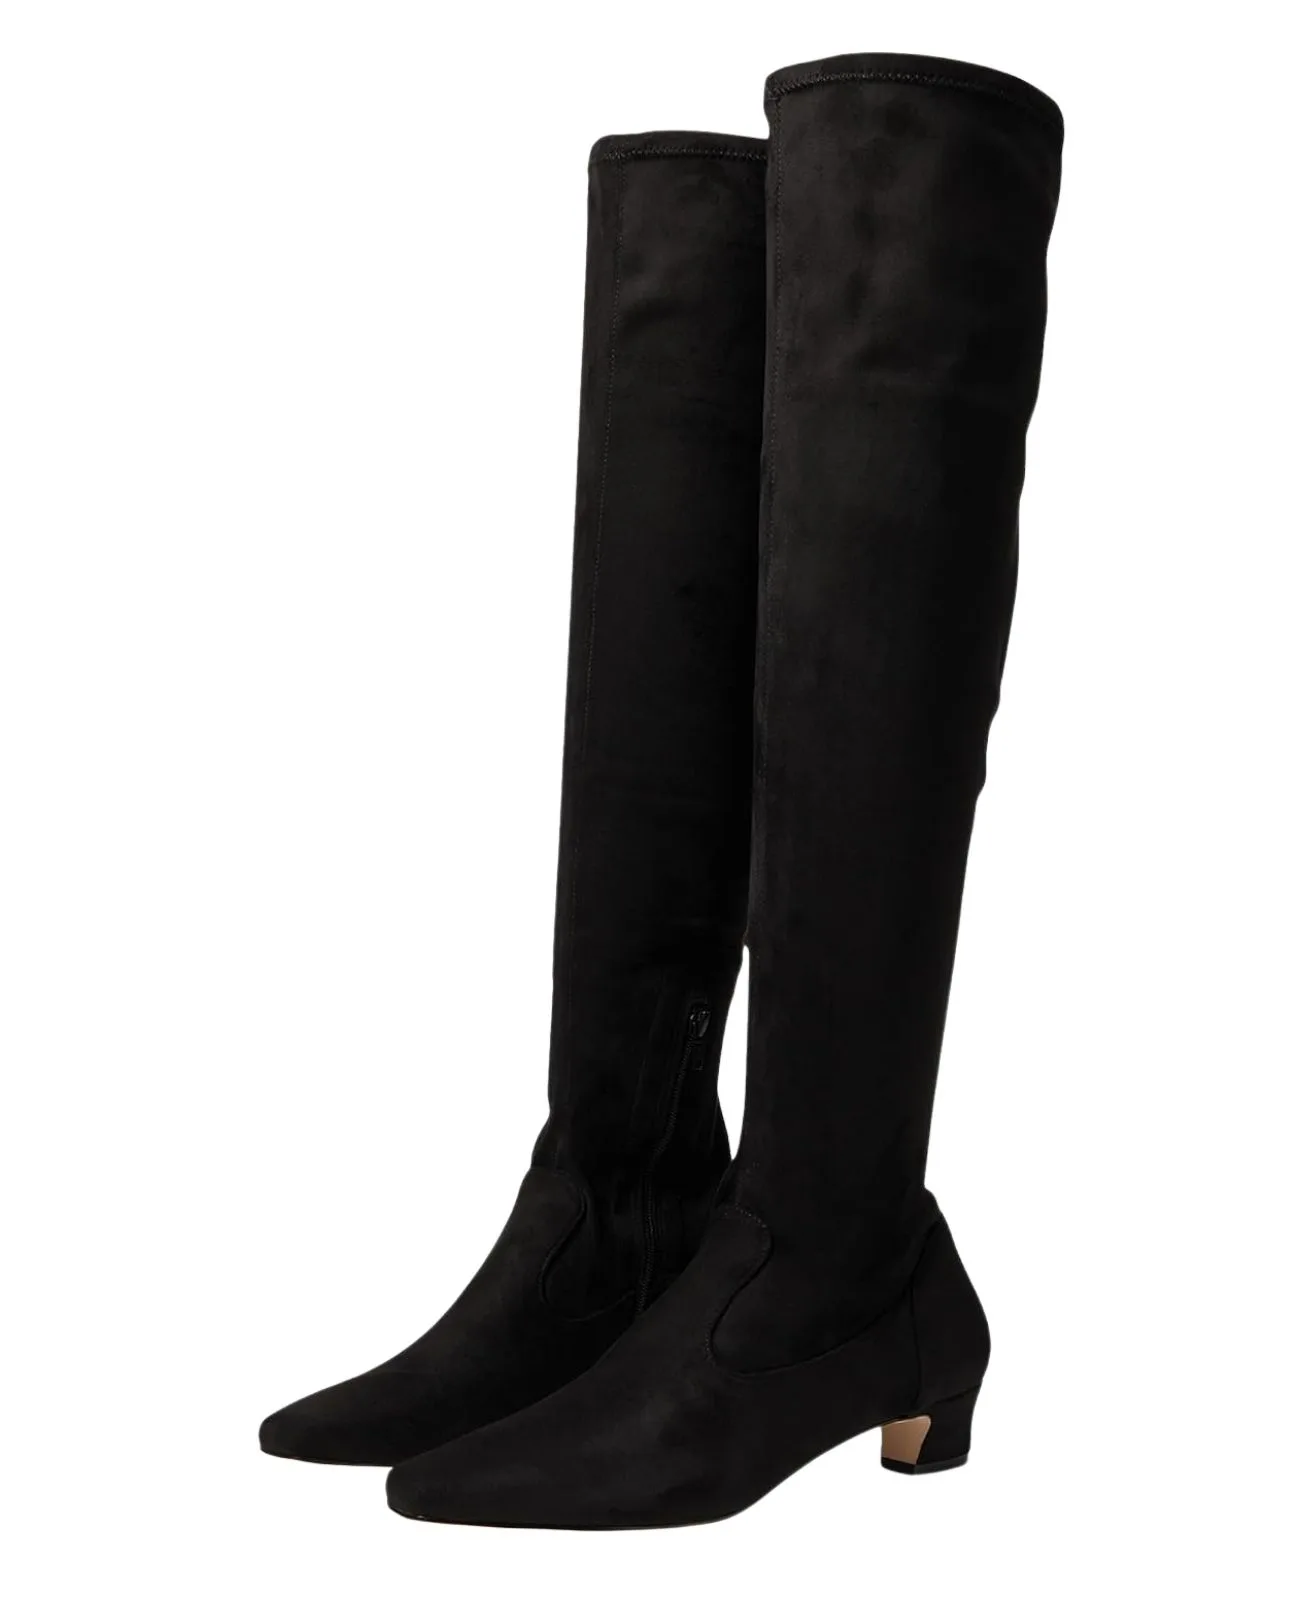 Styling Boots with Leggings - 9 Best Boots to Wear with Leggings